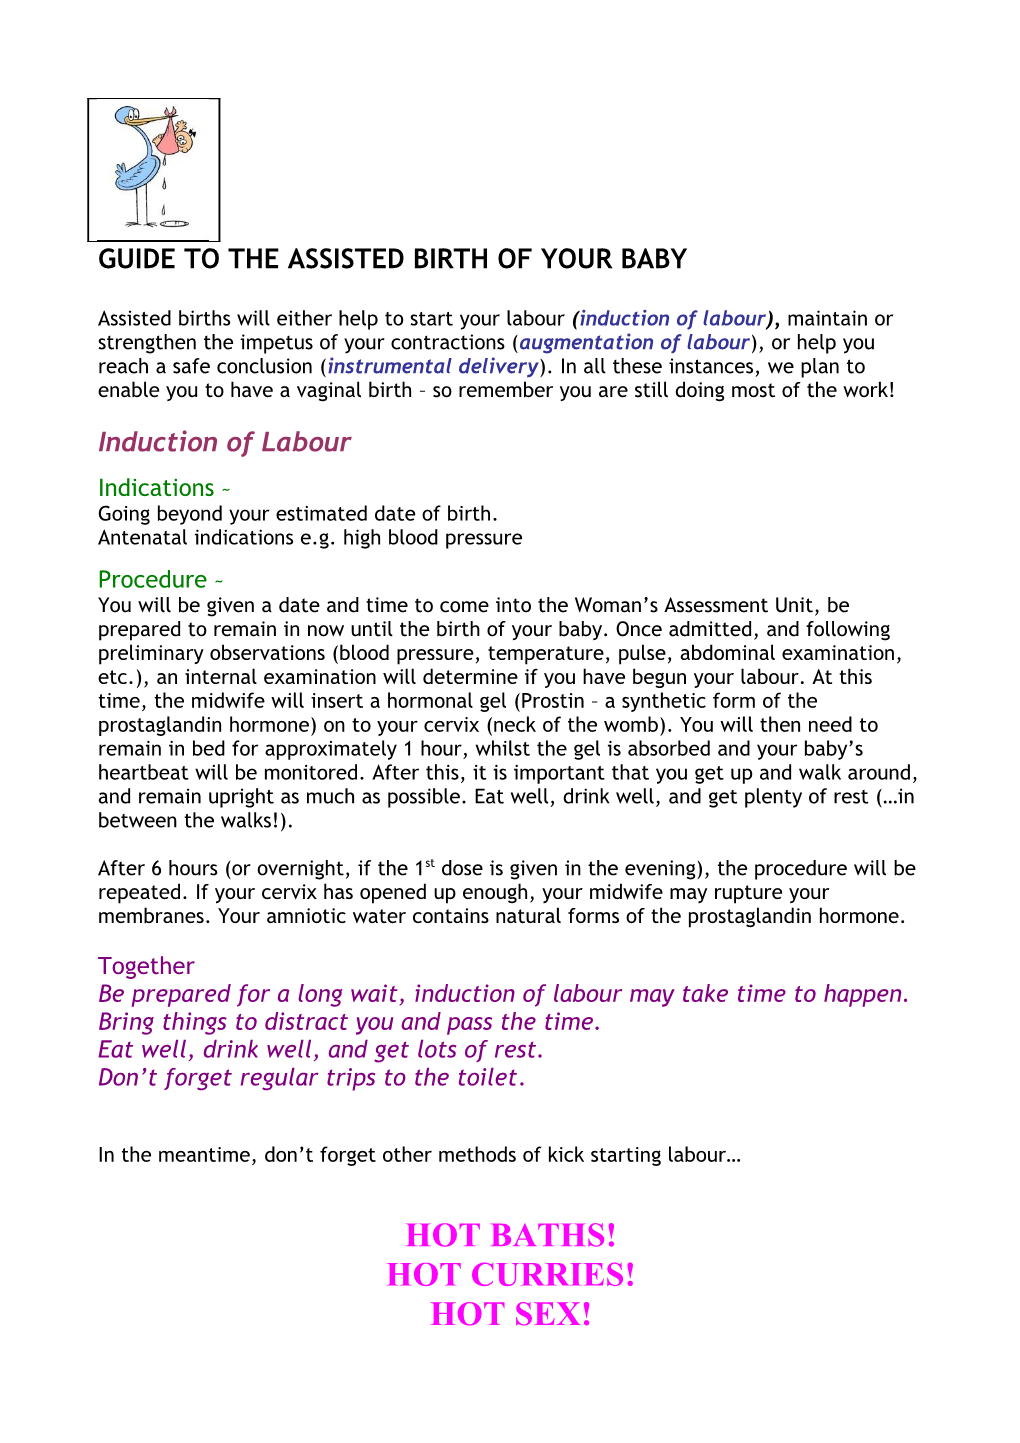 Guide to the Assisted Birth of Your Baby